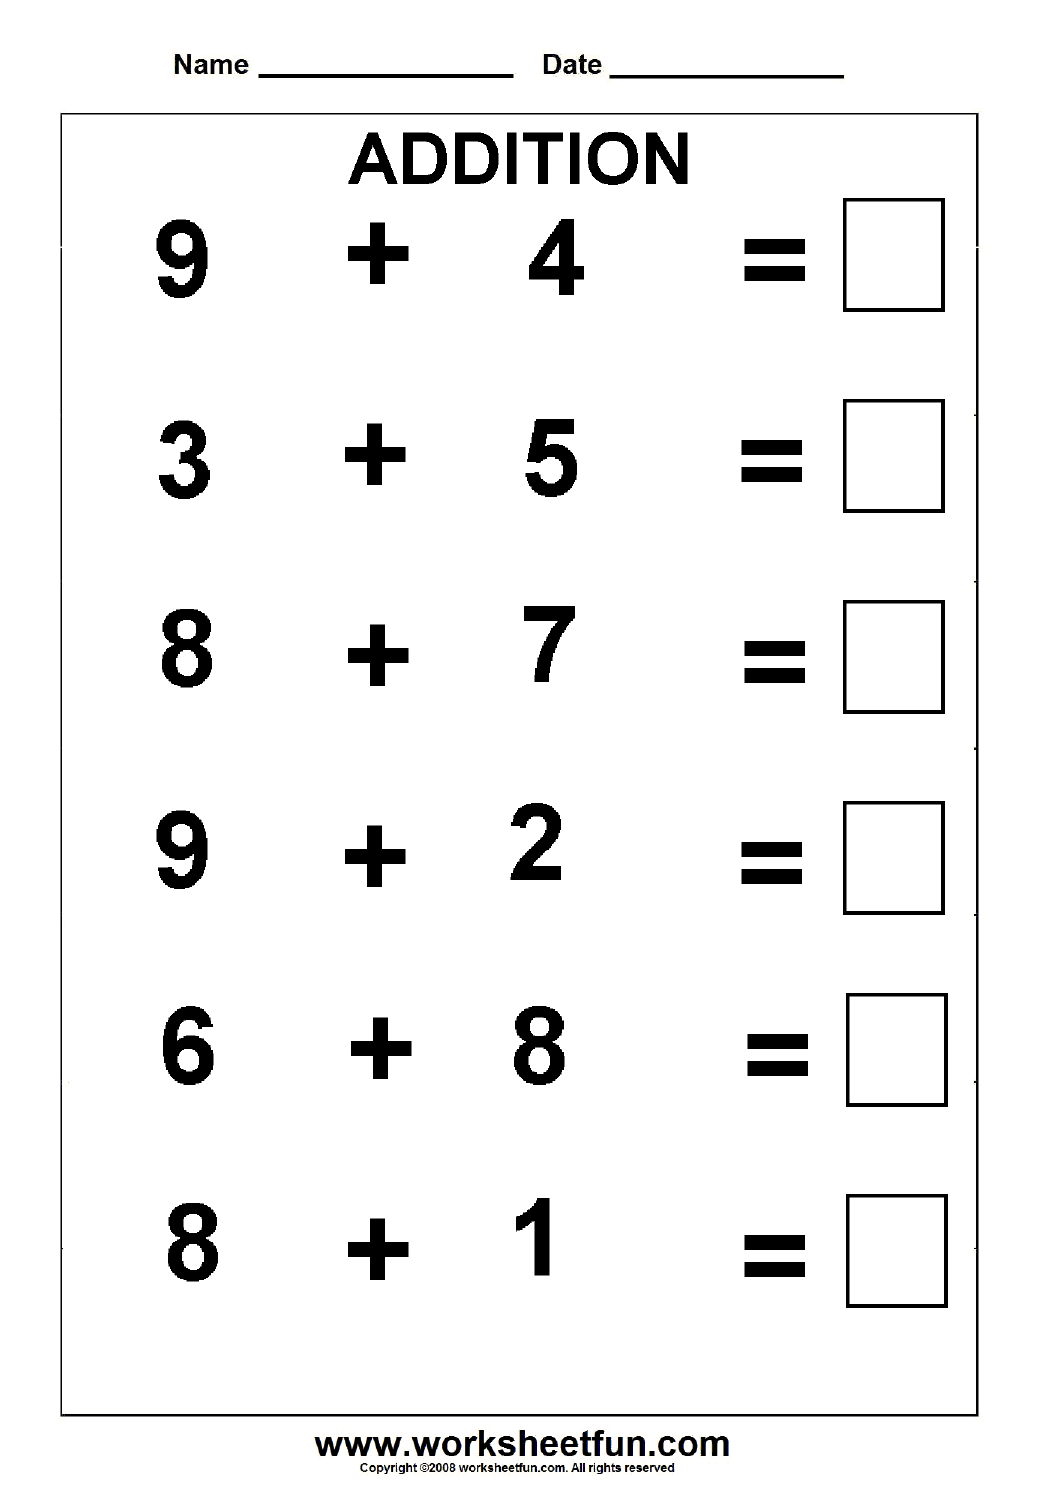 Addition Within 20 Addition Sums To 20 Five Worksheets FREE Printable Worksheets